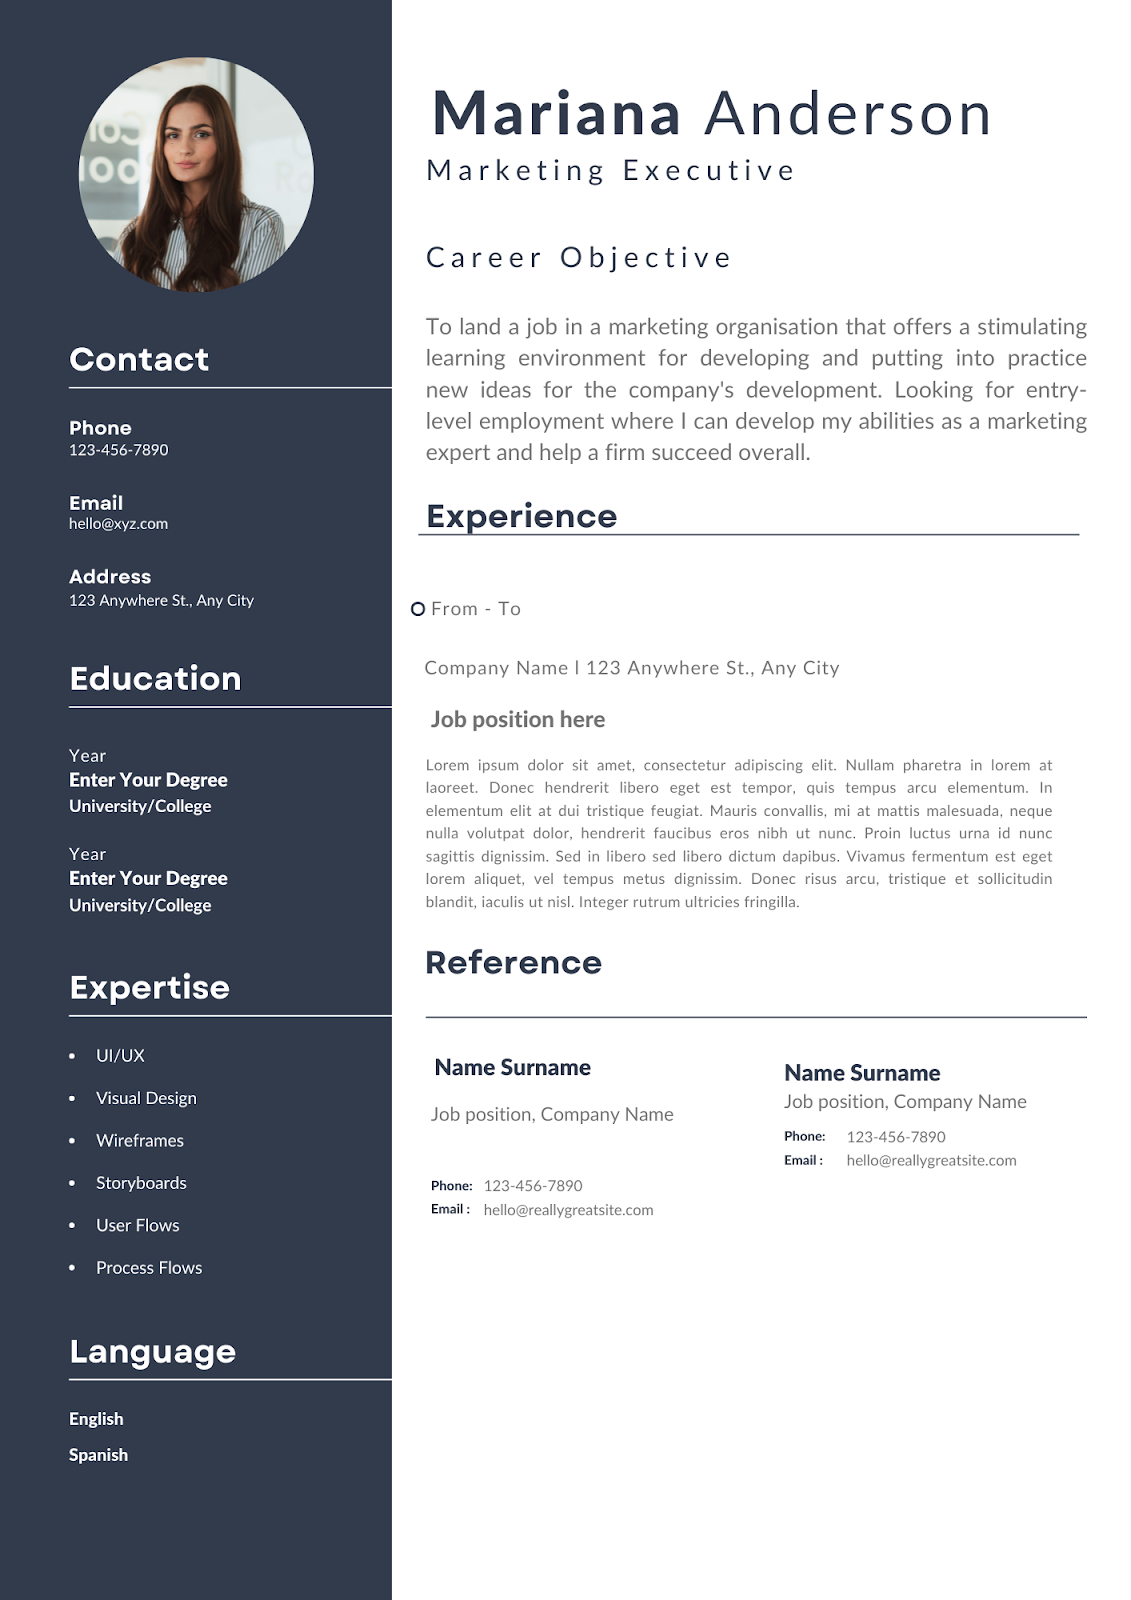 career objective
resume objective examples
career objective for cv
career objective for experienced
career objective sample
job objective
resume summary examples
cv objective examples
job objective examples
resume objective sample
student resume objective examples
cv objective sample
professional cv
career goals examples
career objective for students
job resume examples
resume summary examples for students
job cv
best resume examples
career objective summary
cv summary example
best career objective
objective to write in resume
career examples
professional summary resume sample
professional summary resume examples
profile summary sample
profile summary for job
cv sample for job
resume profile summary examples
professional objective
resume career objective examples
job objective sample
resume profile examples for students
cv examples for job
professional objective examples
good resume objective examples
career summary for cv
cv objective for students
best career objective for cv
cv writing sample
professional goals examples for resume
resume job objective examples
cv summary examples for students
my career objective
it career objective
sample professional summary
career objective for it professional
career goals examples for resume
objective for resume
career objective for resume
objective for cv
career objective examples
resume objective no experience
good objective for resume
cv examples
objective statement examples
resume objective statement
resume skills examples
job objective for resume
project manager resume
resume objective statement examples
good resume examples
resume profile examples
best objective for resume
student resume examples
teacher resume examples
customer service resume examples
professional objective for resume
customer service resume objective
resume templates
resume examples
best career objective for resume
project manager resume examples
cv sample
writing cv
skills for cv
skills examples
resume skills
resume help
professional resume
job resume
summary for resume
objective for teacher resume
professional summary for resume
cv examples for students
career objective for teacher
best resume
technical skills for resume
software engineer resume examples
software engineer resume
objectives examples
resume description examples
good resume
career objective for engineer
professional resume examples
marketing resume examples
make resume
customer service skills resume
career change resume objective examples
good cv examples
cv profile examples
work experience resume
resume profile
marketing resume
administrative assistant resume examples
summary for cv
good objective statement for resume
work resume
nursing resume examples
resume objective for experienced
profile summary examples
best skills for resume
profile summary for cv
profile summary for resume
skills in resume sample
work experience examples
cv for students
resume job description examples
best objective for cv
cv skills examples
resume work
student cv template
cv examples for students with no experience
student resume template
education resume
resume summary for job
experience resume
resume service
sales resume examples
accounting resume
resume objective lines
customer service cv
sales manager resume
teacher resume sample
career objective for customer service
cv for students with no experience
best cv examples
sample resume templates
resume experience example
nursing resume template
accounting resume examples
business resume
education resume examples
summary for resume with no experience
career summary examples
professional cv samples
skills summary for resume
manager resume examples
restaurant manager resume
marketing manager resume
good skills for cv
good summary for resume
it resume examples
software engineer resume template
career objective for accountant
career objective for internship
skills to write in cv
skills for teacher resume
resume summary examples for students with no work experience
sales skills resume
medical assistant resume objective
objective for cv for job
summary for resume with no experience examples
best cv samples
resume guide
skills resume template
teacher cv sample
administrative assistant resume objective
objective for resume for students
jobs examples
description for resume
writing resume
career objective for software engineer
resume examples for students with no work experience
experience examples
resume with no experience examples
professional cv examples
professional summary for resume no work experience
good resume skills
professional summary for cv
it skills for cv
nursing resume objective
management skills resume
sample resume for experienced
a good resume
best summary for resume
restaurant resume
career change resume objective
work resume examples
internship resume objective
technical skills in cv
engineering resume examples
cv resume example
work experience resume sample
medical resume
assistant manager resume
cv guide
teaching assistant resume
summary statement resume
career objective statement
objective for customer service
example of a written cv
good skills to have on resume
resume summary examples for customer service
customer service skills cv
technical resume
technical skills examples for resume
resume for engineering students
medical cv template
resume sample for students
cv experience example
good objective for cv
summary and objective in resume
best skills for cv
teacher cv template
objective for sales resume
accounting skills resume
career goals for resume
cv with no experience sample
best resume objective statements
customer service cv sample
nurse resume sample
management resume
career summary for resume
project manager resume sample
accountant resume sample
it cv template
good career objective for resume
sales job description for resume
skills to include in cv
real resume
company resume
sample cv for teaching job with no experience
accountant job description for resume
resume statement
administrative assistant resume sample
resume for internship example
customer service manager resume
work resume template
good resume sample
skills in resume for students
skills to write on resume
dental assistant resume objective
objective summary resume
skills for cv student
writing a good cv
project manager cv example
cv statement examples
administrative assistant skills resume
administrative skills resume
resume statement examples
cv statement
accounting resume template
professional skills for cv
objective statement for cv
resume summary statement examples
administrative assistant objective
job summary for resume
example of professional summary
engineering technical skills for resume
it resume sample
teacher cv example
best resume sample
work objectives examples
your resume
career objective for resume for experienced
student nurse resume
resume work experience example
cv template for students with no experience
medical resume template
resume description sample
skills that look good on a resume
sales assistant resume
sales cv sample
career objective for teaching profile
cv work experience example
marketing cv examples
objective for cv for teaching
write my cv
cv sample template
engineering cv template
nurse cv sample
project manager job description resume
marketing resume template
great cv examples
cv resume sample
career objective for teacher resume
sample resume for nurses with experience
cv template examples
cv skills sample
your career objectives
sales engineer resume
sales assistant job description resume
resume template examples
customer support resume
resume skills examples for students
cv sales
career summary statement
excellent resume examples
customer service objectives examples
internship cv template
resume e
cv summary sample
sales manager resume examples
work objective resume
engineering cv examples
software engineer cv template
professional summary on a cv
resume template for experience
nursing cv template
resume profile sample
marketing assistant resume
teaching objective examples
accountant cv sample
internship cv sample
software engineer cv example
sales and marketing resume
best profile summary for resume
sales resume template
technical project manager resume
project manager resume summary
account manager job description for resume
great objective for resume
accounting resume objective
accounting assistant resume
project manager resume template
medical resume examples
customer service summary resume
resume analysis
medical student resume
business management resume
sales skills cv
career objective for students with no experience
sample summary for resume
project manager cv sample
accountant cv template
career objective for experienced software engineer
experience description resume examples
job resume skills
cv description example
assistant manager job description resume
education cv examples
medical cv example
sales and marketing job description for resume
technical resume examples
sales resume sample
career resume
customer service cv example
it resume objective
job experience resume
resume company
software engineer resume sample
it cv examples
profile statement for cv
career objective for administrative assistant
marketing cv template
cv for engineering students
career statement for resume
nursing career objective
nurse resume skills
career objective for accountant assistant
example of excellent cv
skills to include on a resume
strong objective for resume
software skills in cv
resume for experienced software engineer
nursing cv examples
restaurant skills for resume
marketing resume objective
sales manager skills resume
best professional summary for resume
teaching assistant resume description
good cv sample
medical assistant resume sample
career objective for sales
technical resume template
financial skills resume
customer service resume template
cv sample for students
good career objectives
dental assistant resume template
marketing cv sample
professional statement resume
top skills for cv
career objective for marketing
resume template for no experience
marketing job description for resume
about you in resume examples
manager resume summary
cv summary statement
best summary for cv
career objective for nursing student
cv sales manager
write your cv
sales manager resume sample
writing a cv with no experience
manager resume sample
cv marketing manager
skills for resume student
good looking resume
assistant manager skills resume
nursing student resume examples
sales manager cv example
resume for it job
software engineering manager resume
resume objective examples for customer service
marketing resume sample
experienced nurse resume
education in resume sample
sample resume objective statements
sales manager resume objective
software skills cv
resume objective template
skills for engineering resume
profile description for resume